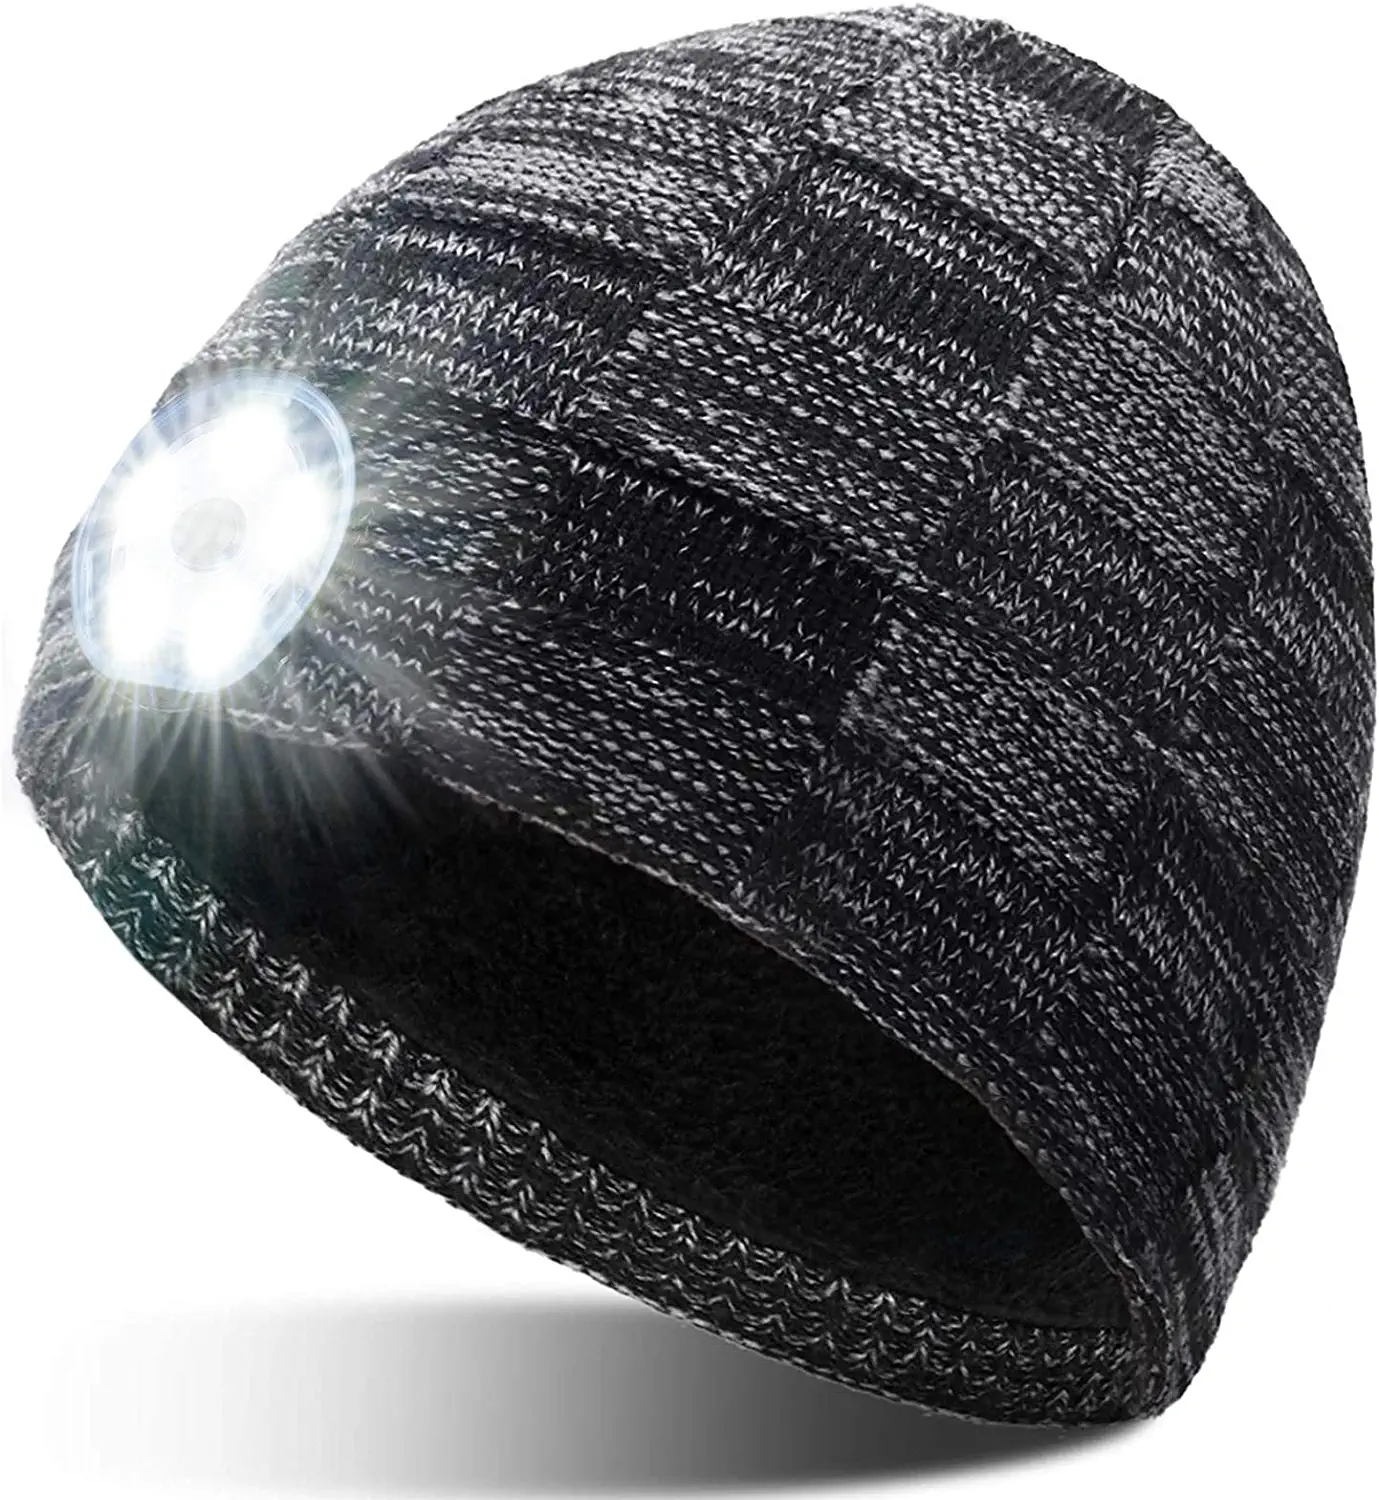 LED Beanie Hat with Light Christmas Stocking Stuffers for Men Gifts, USB  Rechargeable Hand Free Headlamp Cap, Unisex Warm Winter Knit Lighted  Headlight Hats for Running, Gifts for Dad Women Black